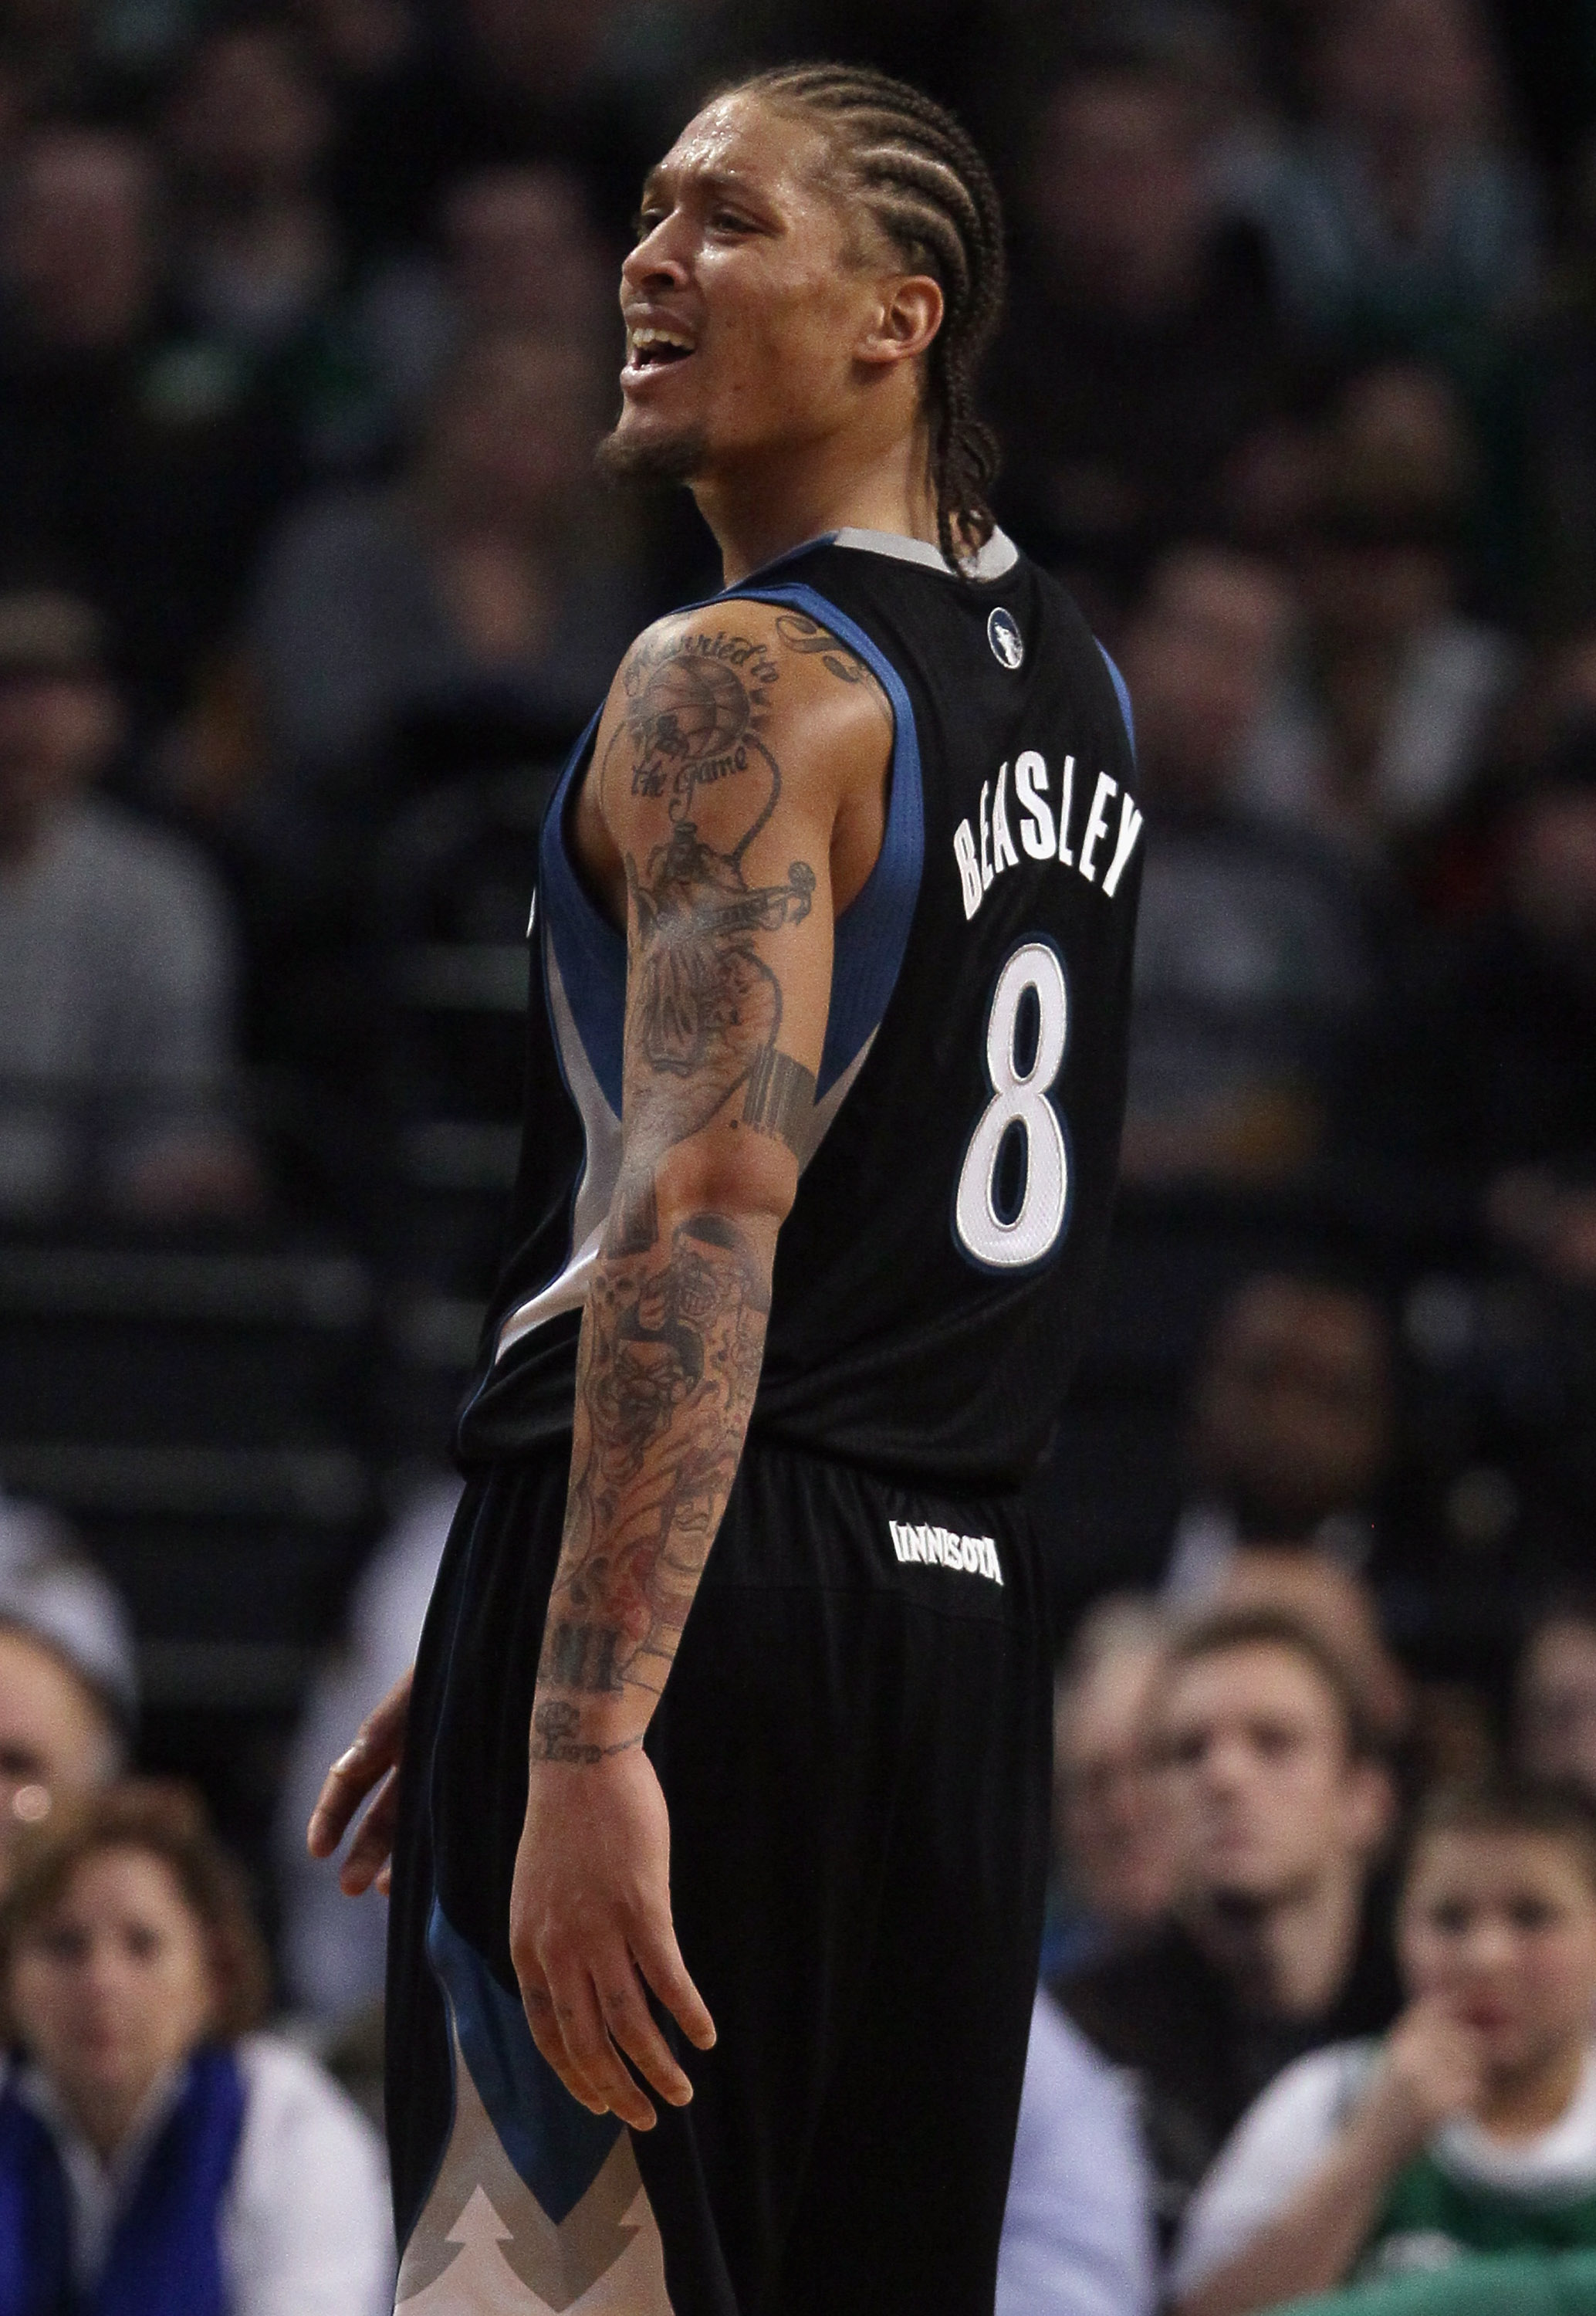 BOSTON, MA - JANUARY 03:  Michael Beasley #8 of the Minnesota Timberwolves reacts to a foul called against him in the second half against the Boston Celtics on January 3, 2011 at the TD Garden in Boston, Massachusetts. The Celtics defeated the Timberwolve